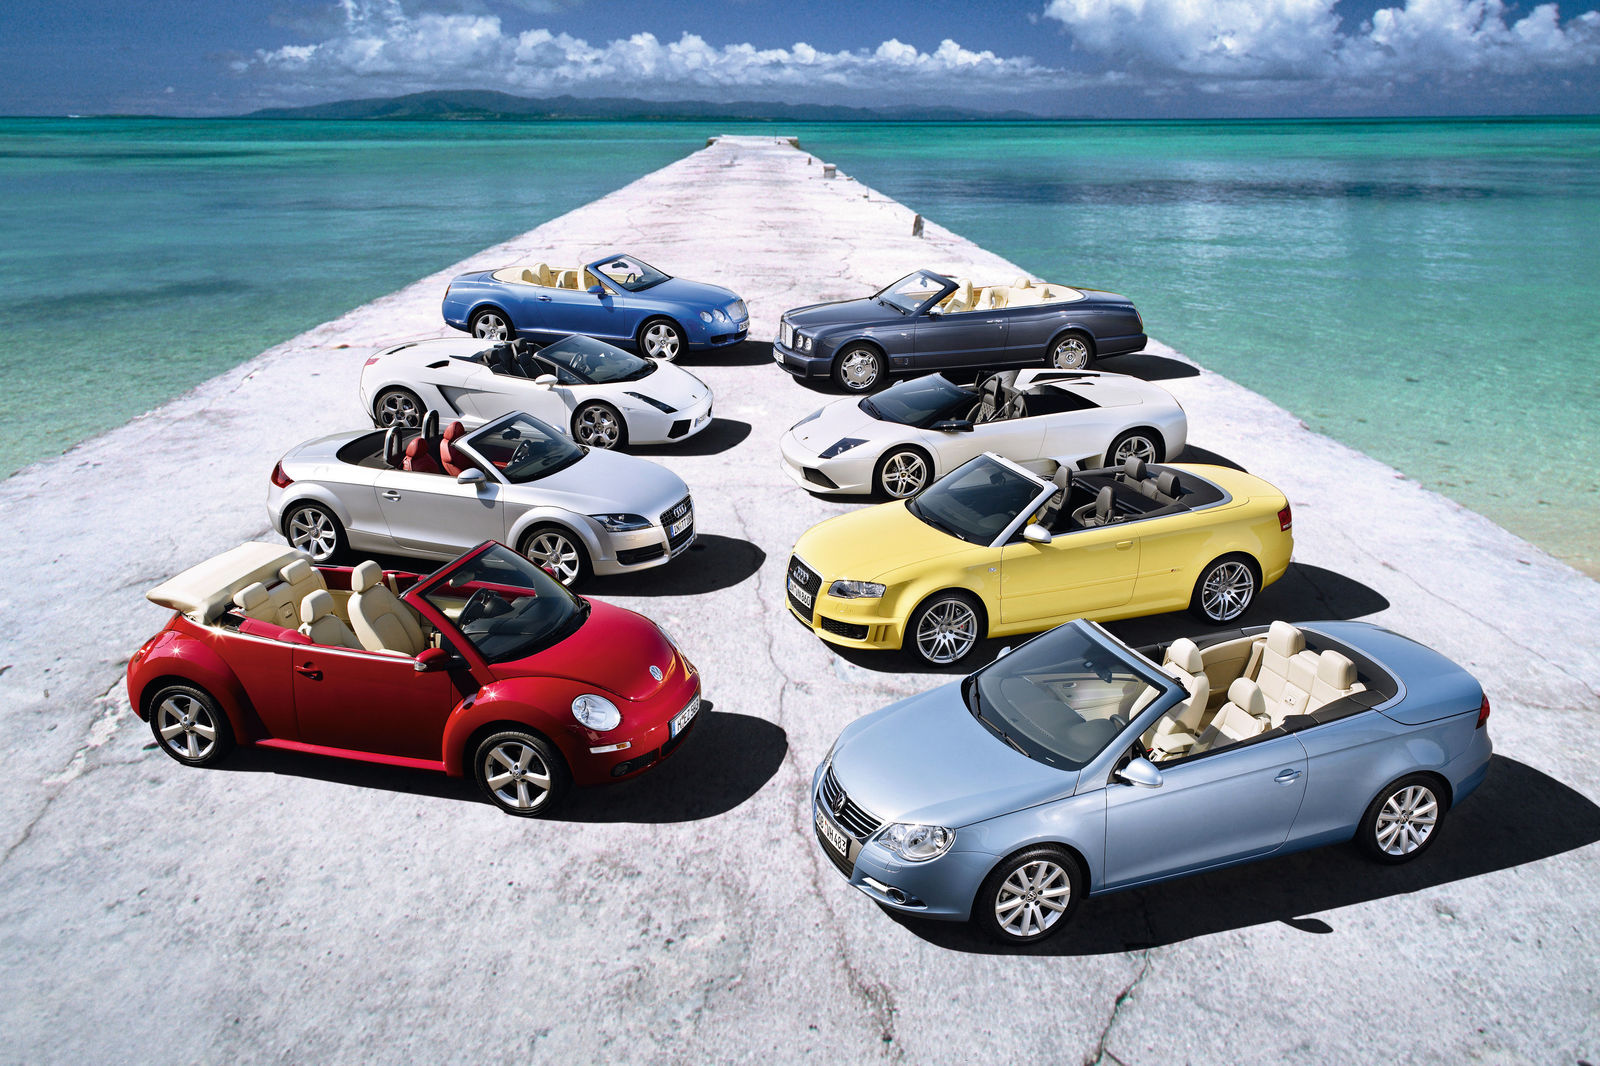 The Convertibles of the Volkswagen Corporation